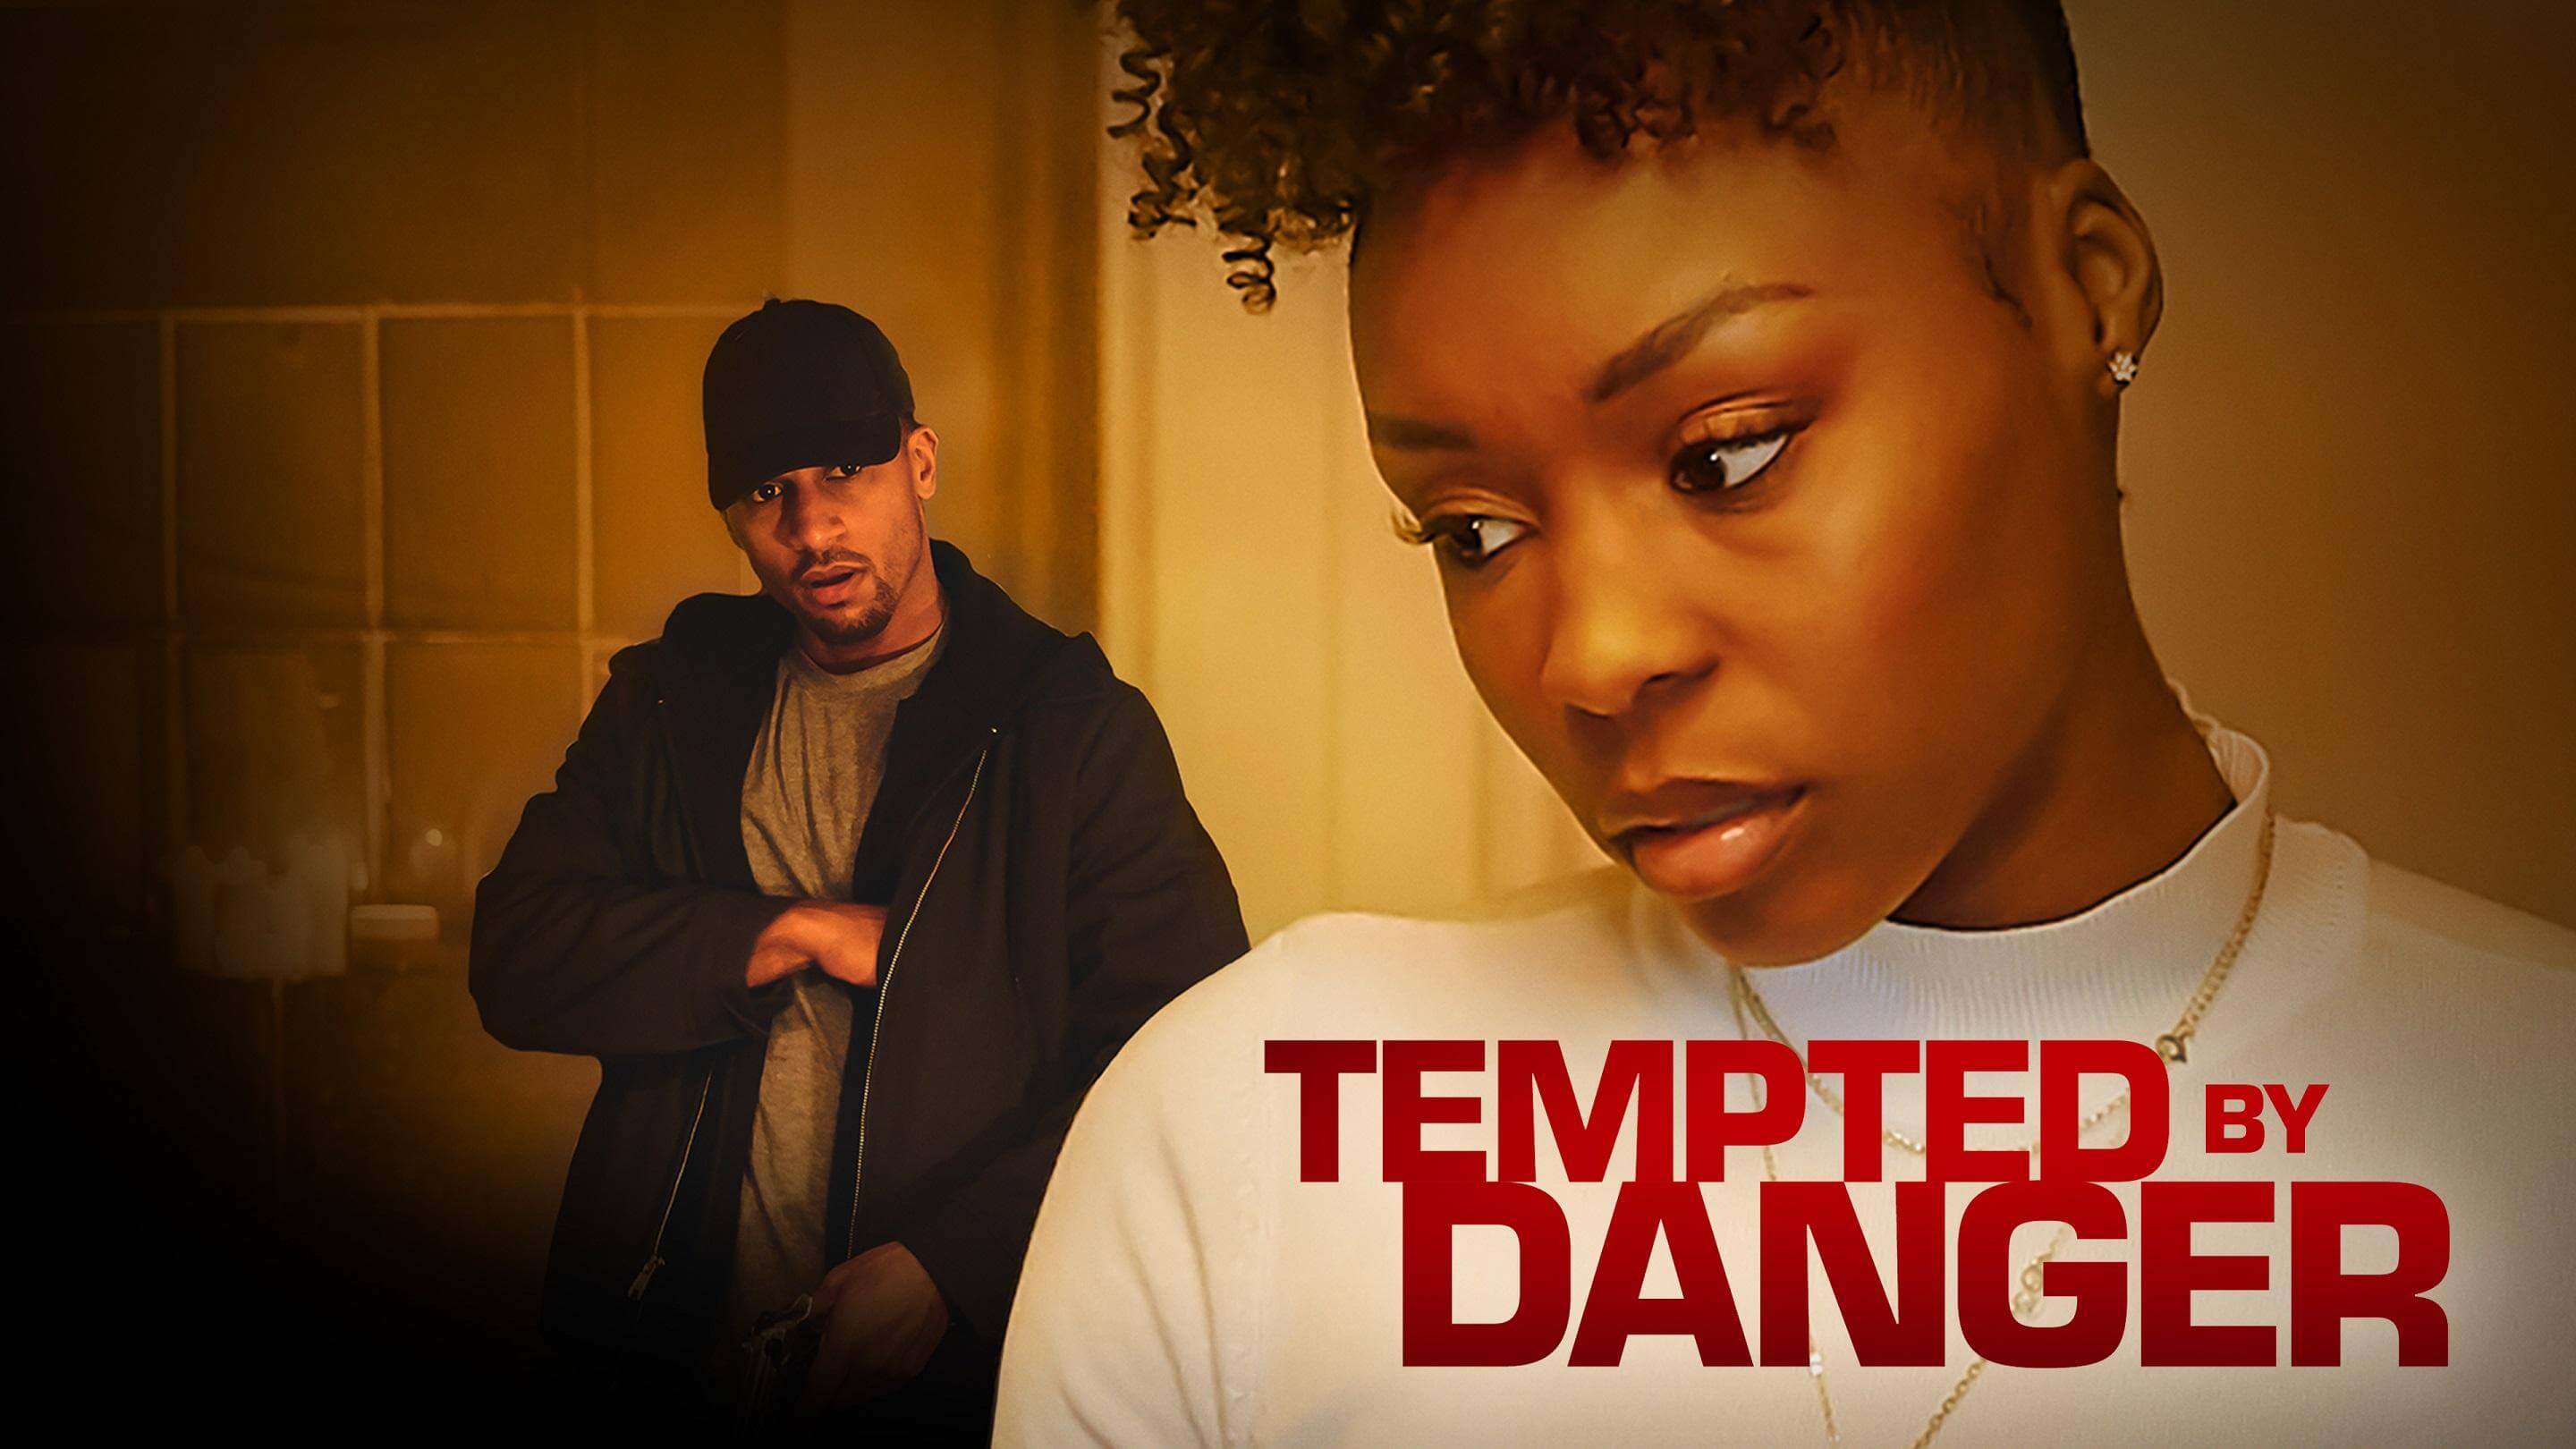 Watch Tempted by Danger (2020) LIFETIME Cast, Watch Online, Full Movie Download